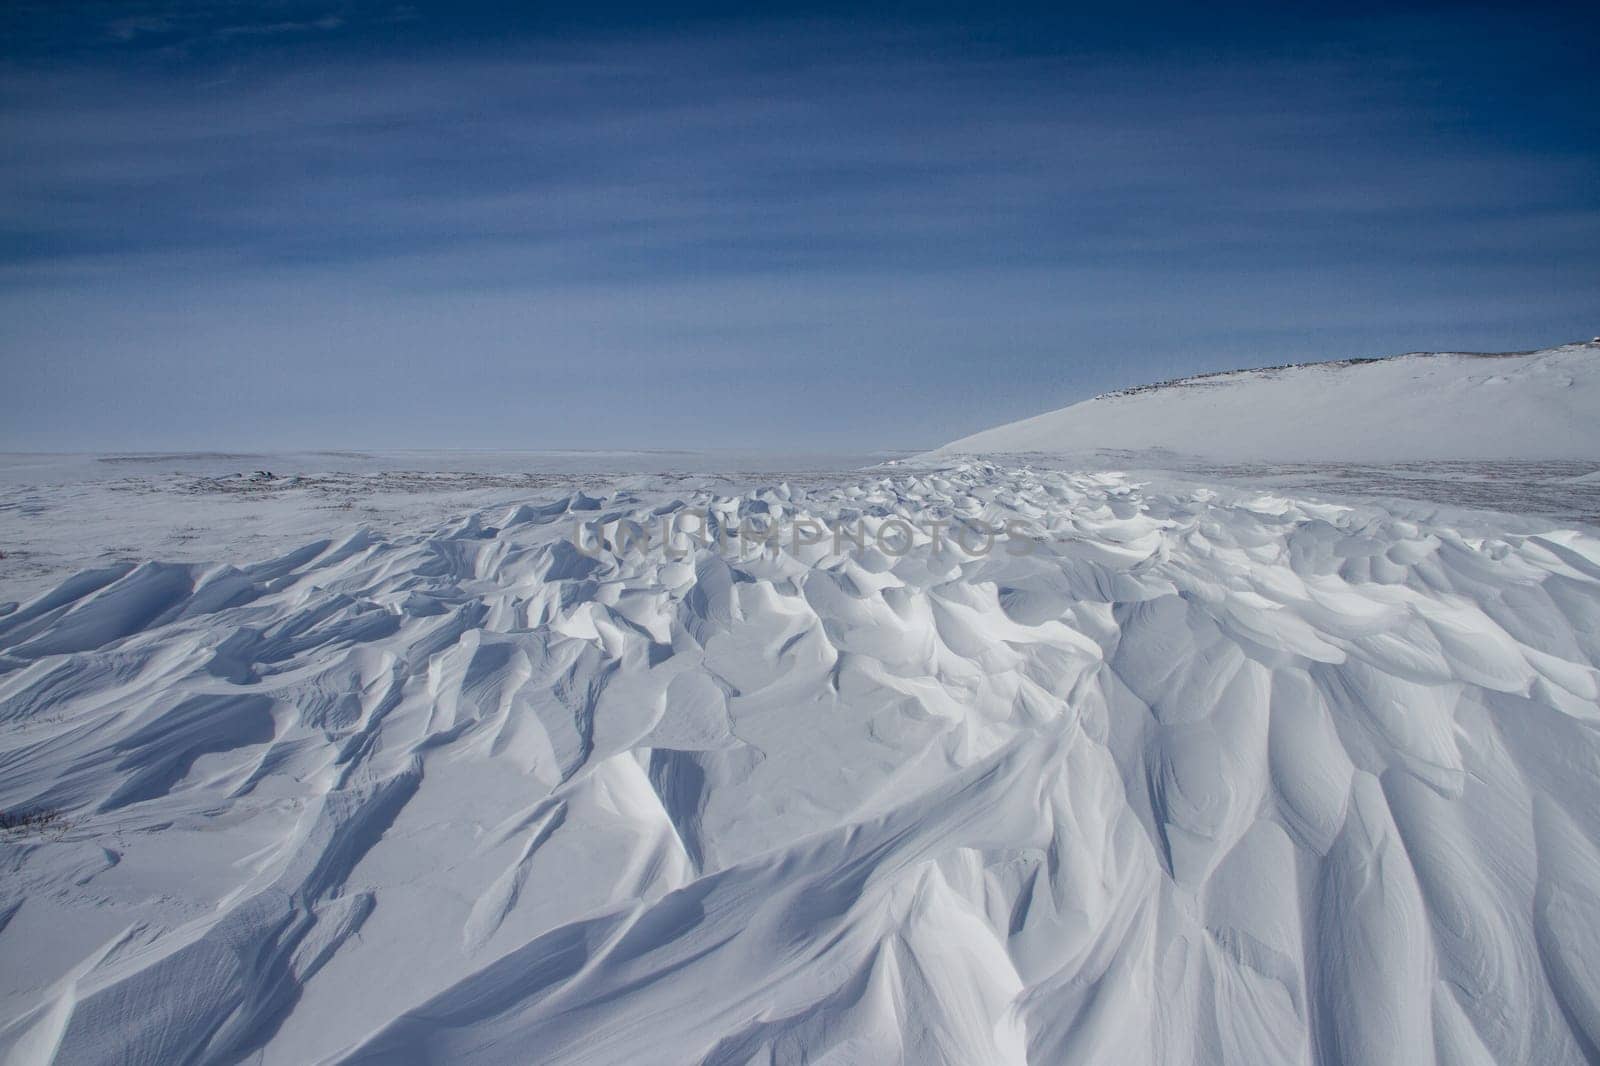 Beautiful patterns of sastrugi, parallel wavelike ridges caused by winds on surface of hard snow, with soft clouds in the sky by Granchinho